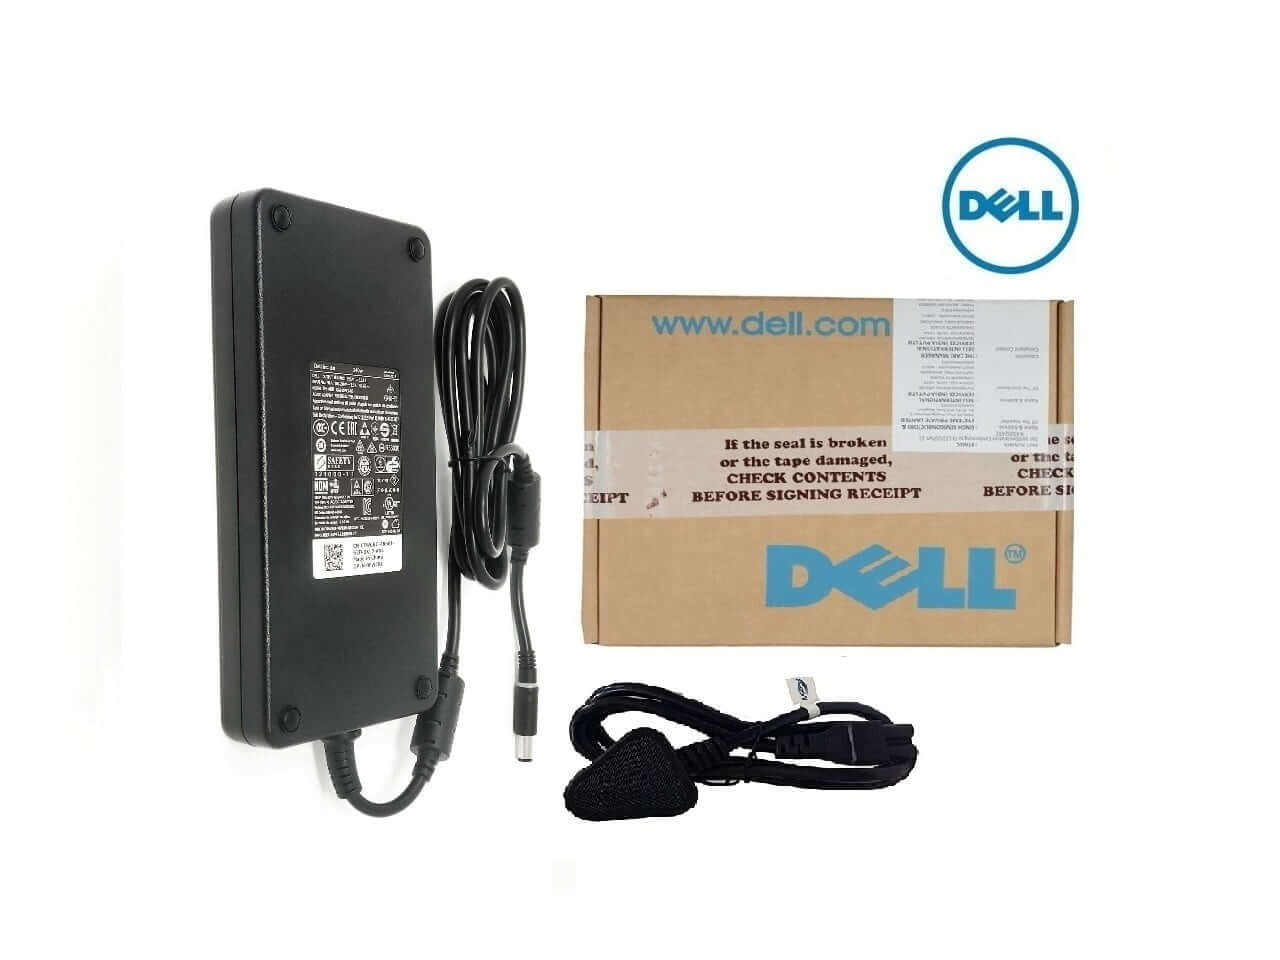 DELL 240w Original Laptop Charger - 19.5V  12.3A Genuine AC Power Adapter  (Center Pin 7.4 mm) R3026